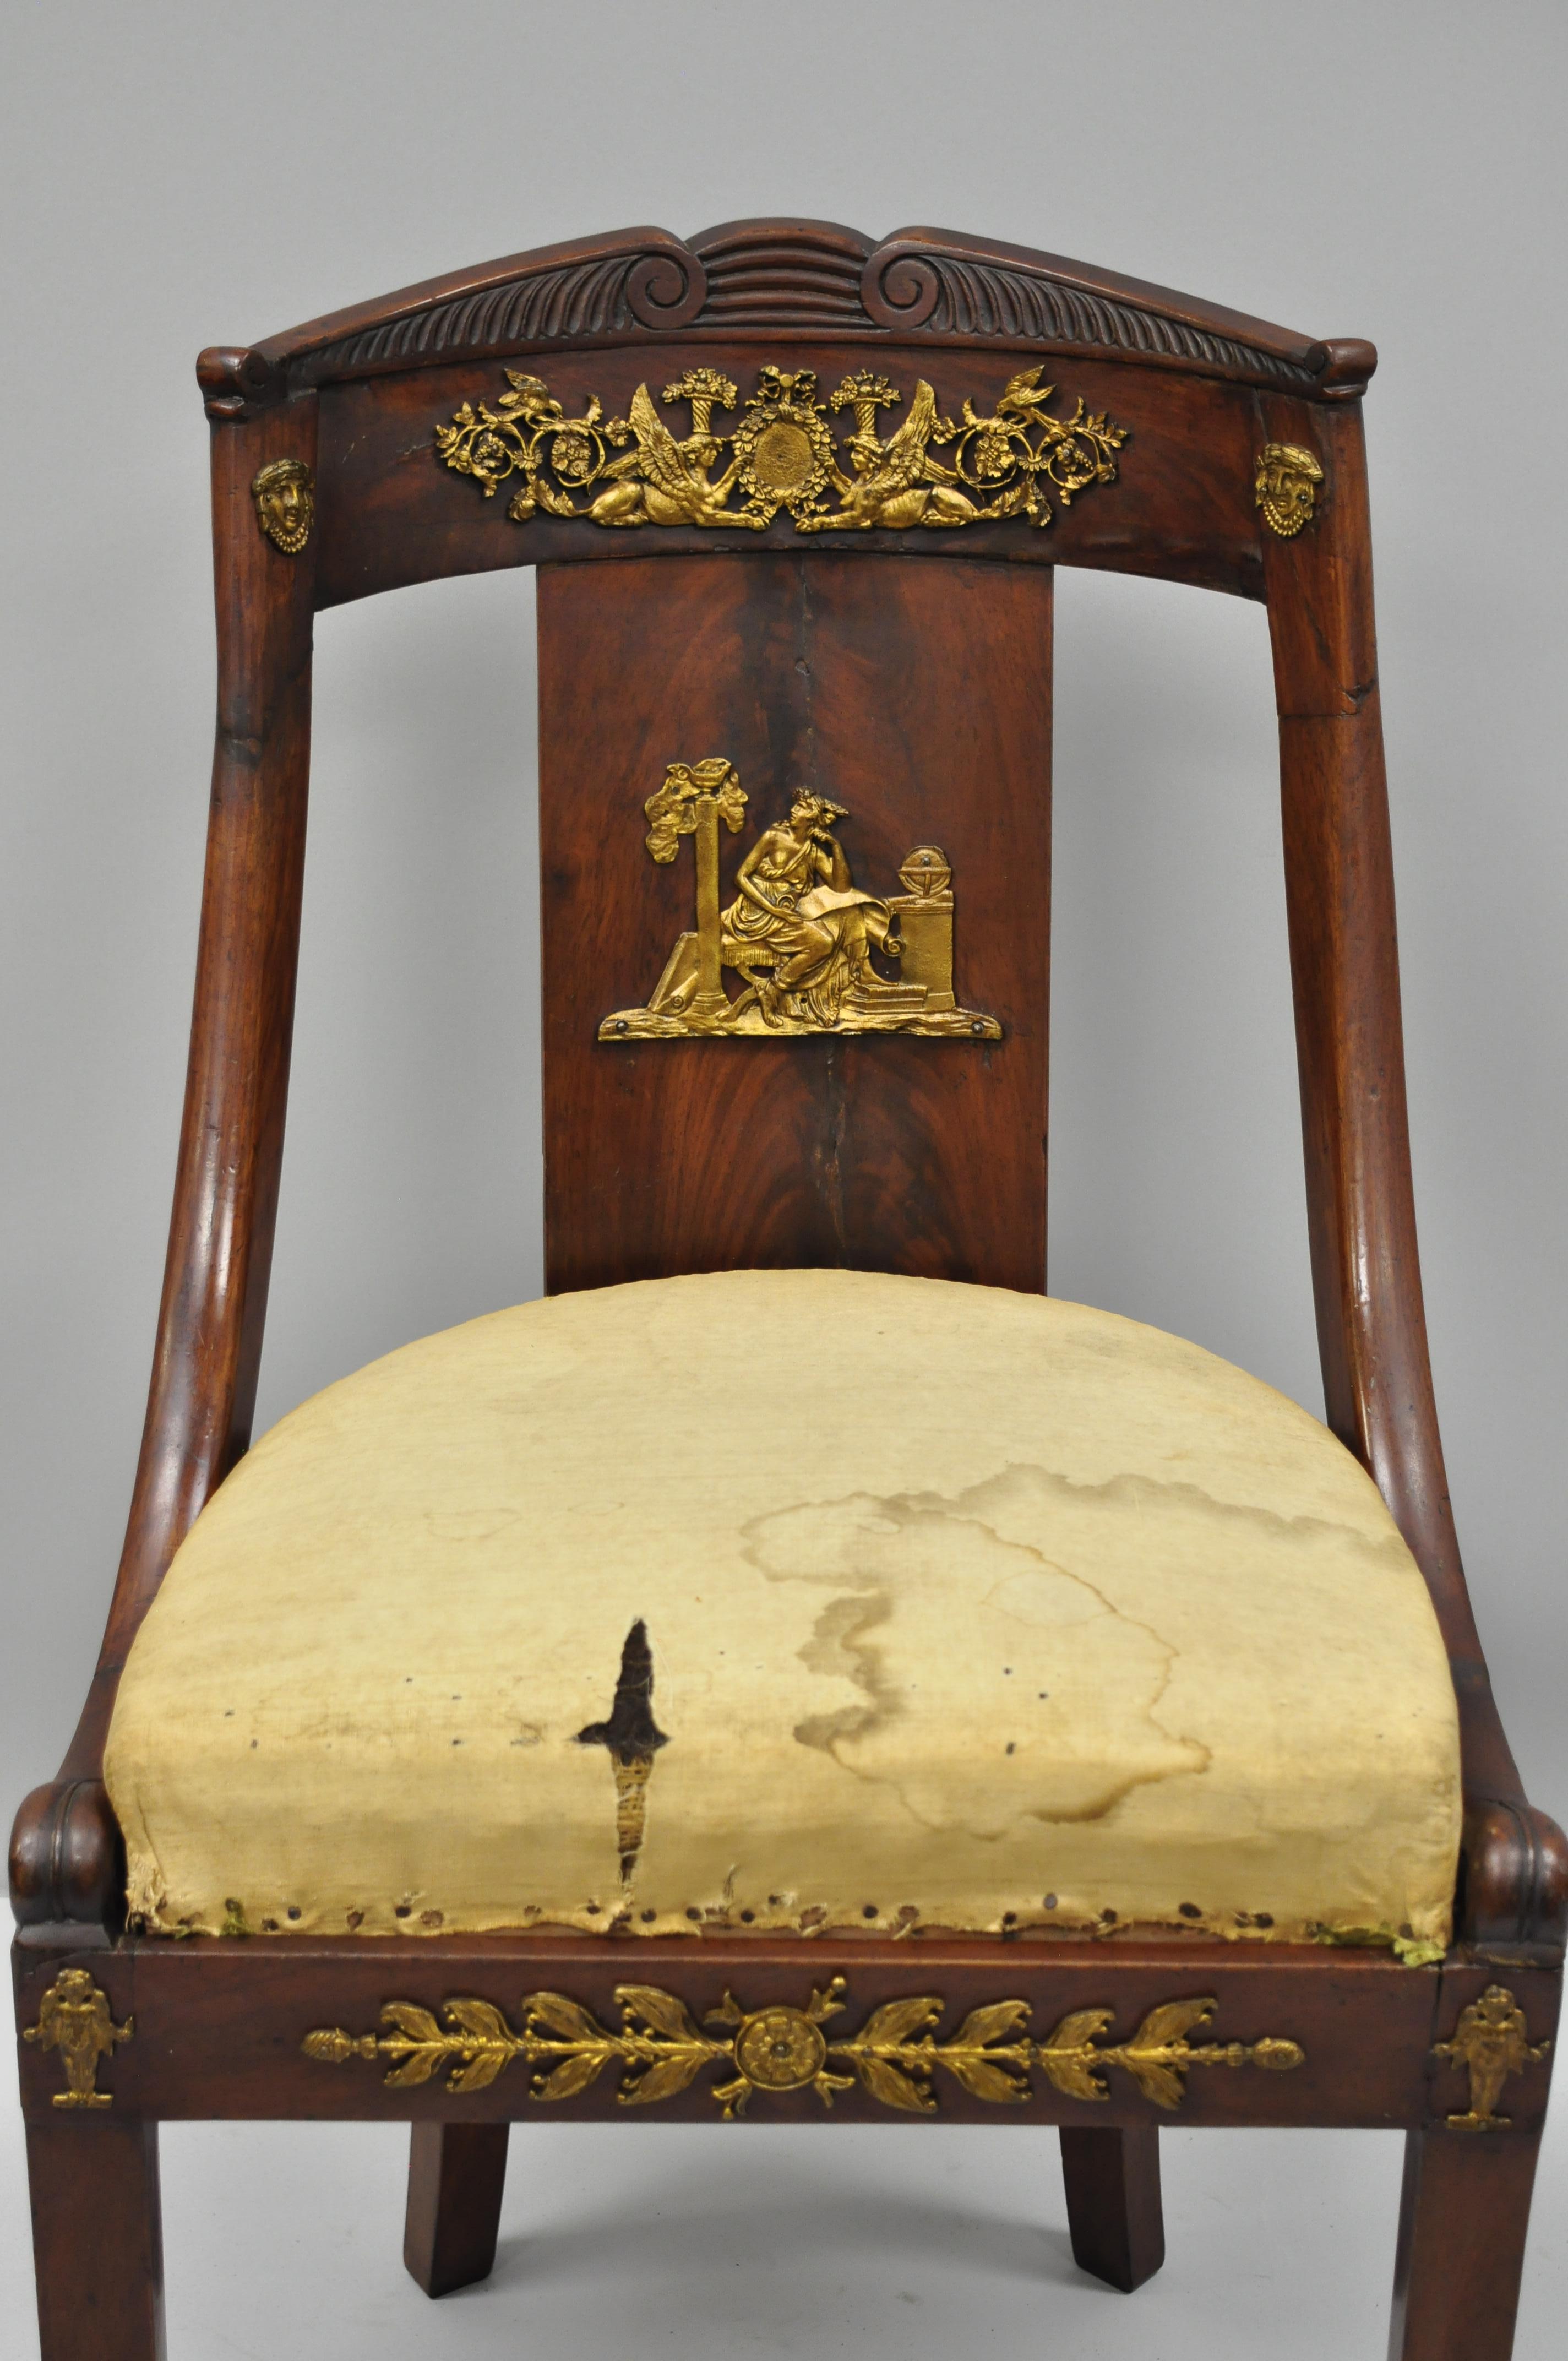 Early 19th Century French Empire Regency Mahogany Side Chair with Bronze Ormolu In Distressed Condition For Sale In Philadelphia, PA